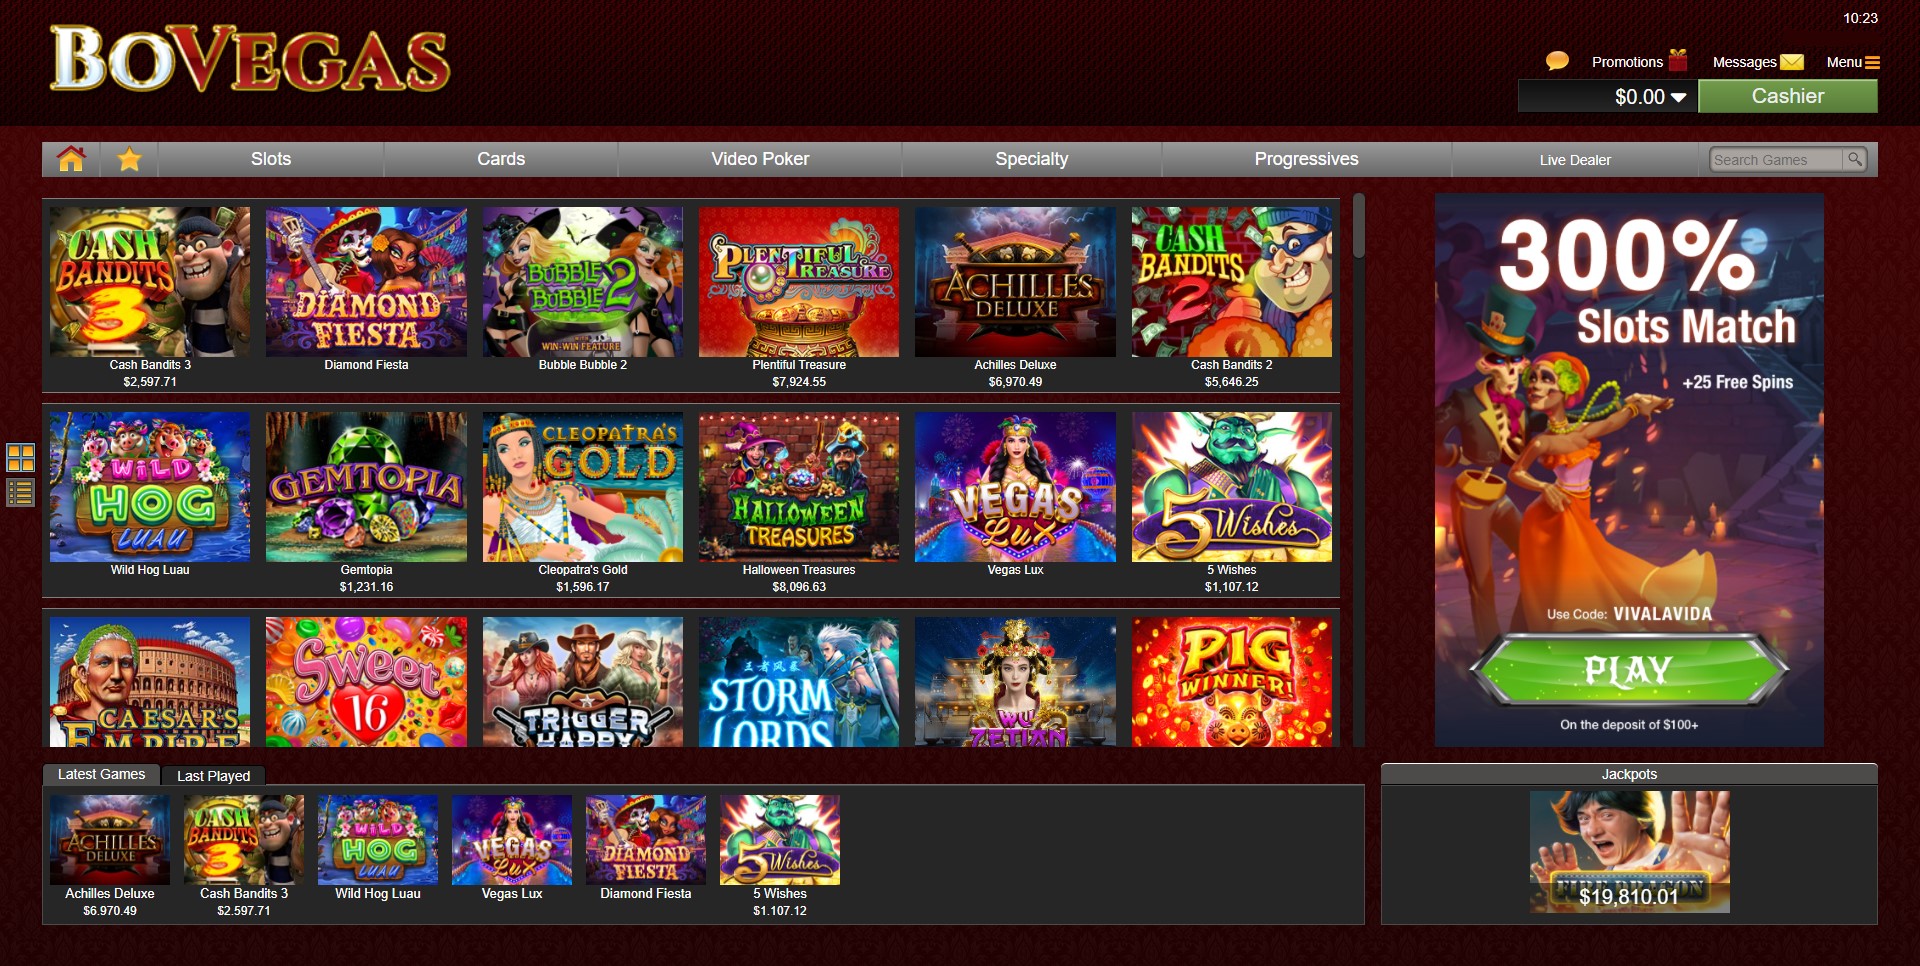 BoVegas game lobby featuring slots